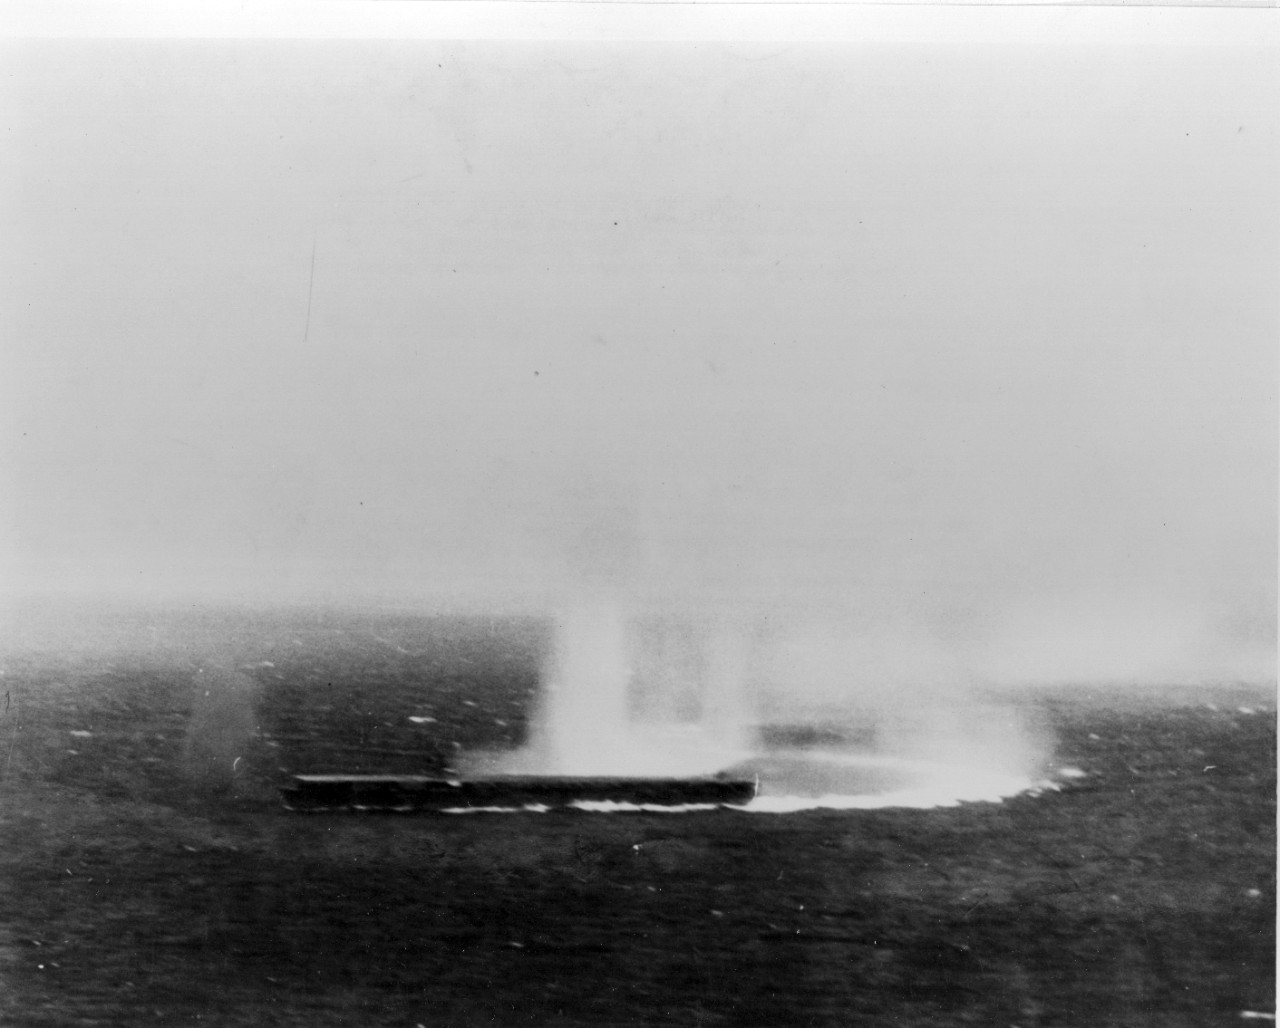 Photo #: 80-G-17027  Battle of Coral Sea, May 1942